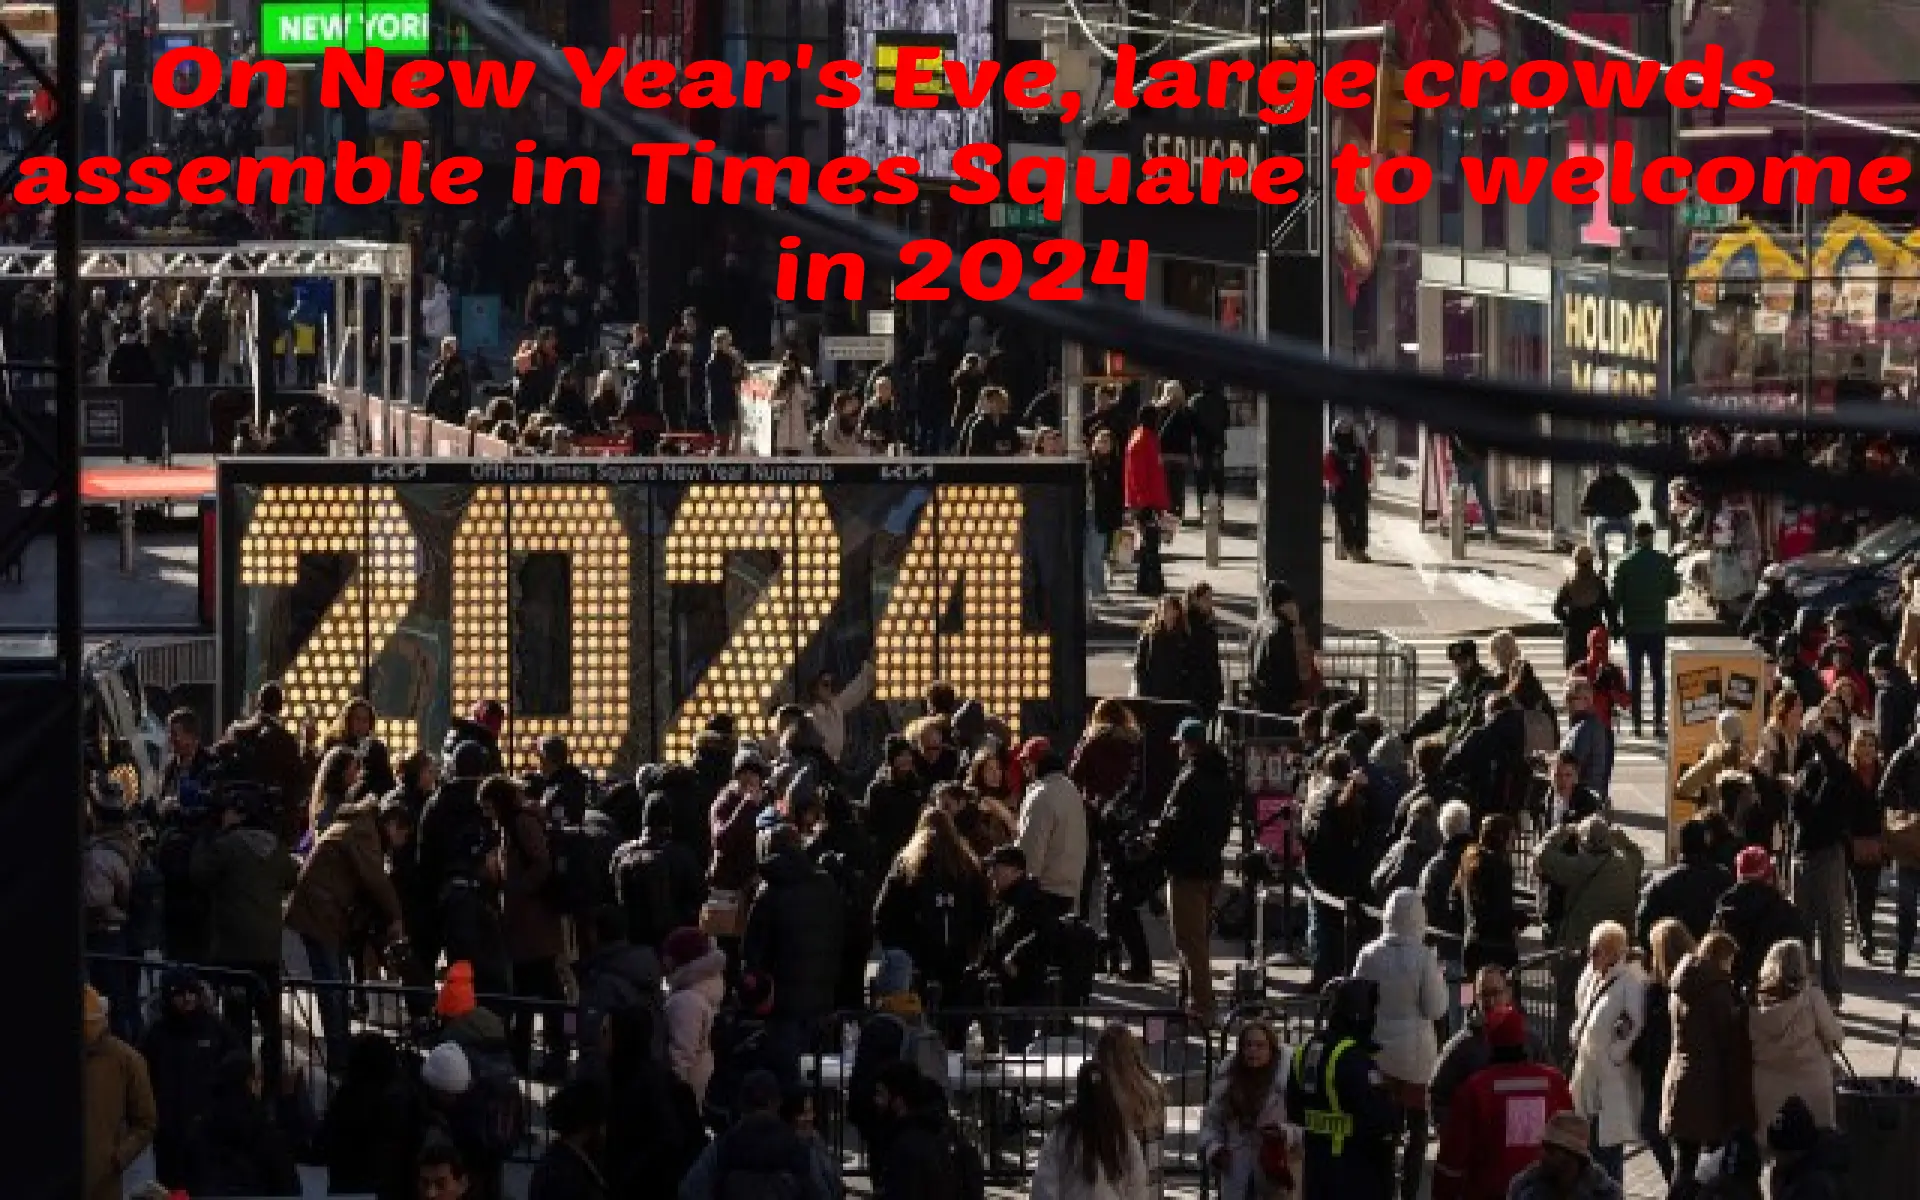 On New Year’s Eve, large crowds assemble in Times Square to welcome in 2024